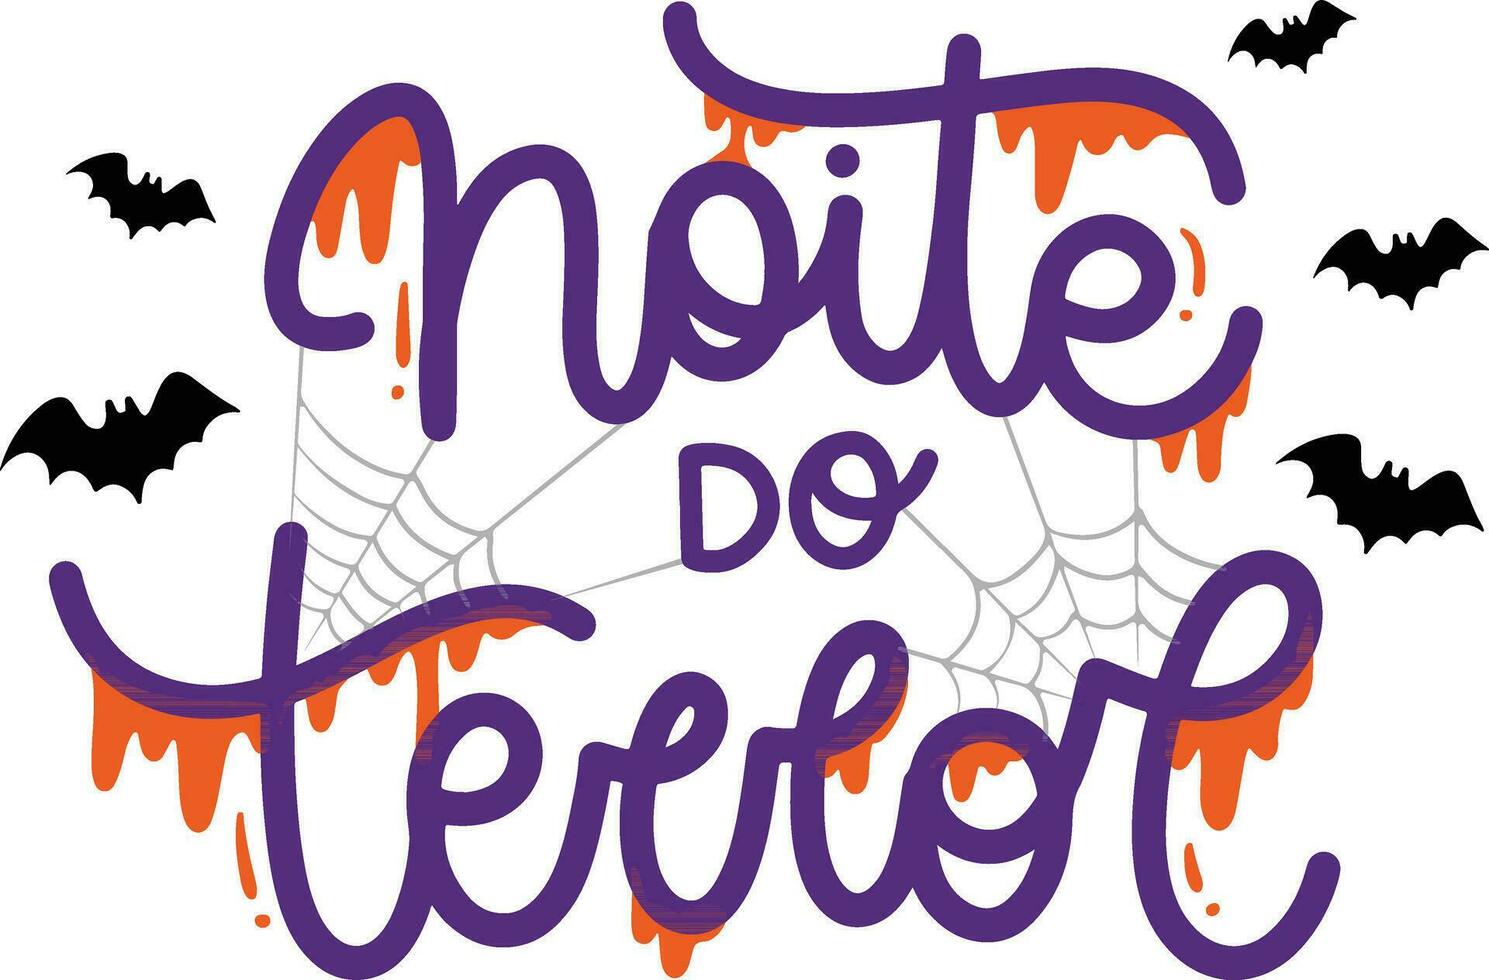 Halloween lettering with spider web and bats. Vector illustration.